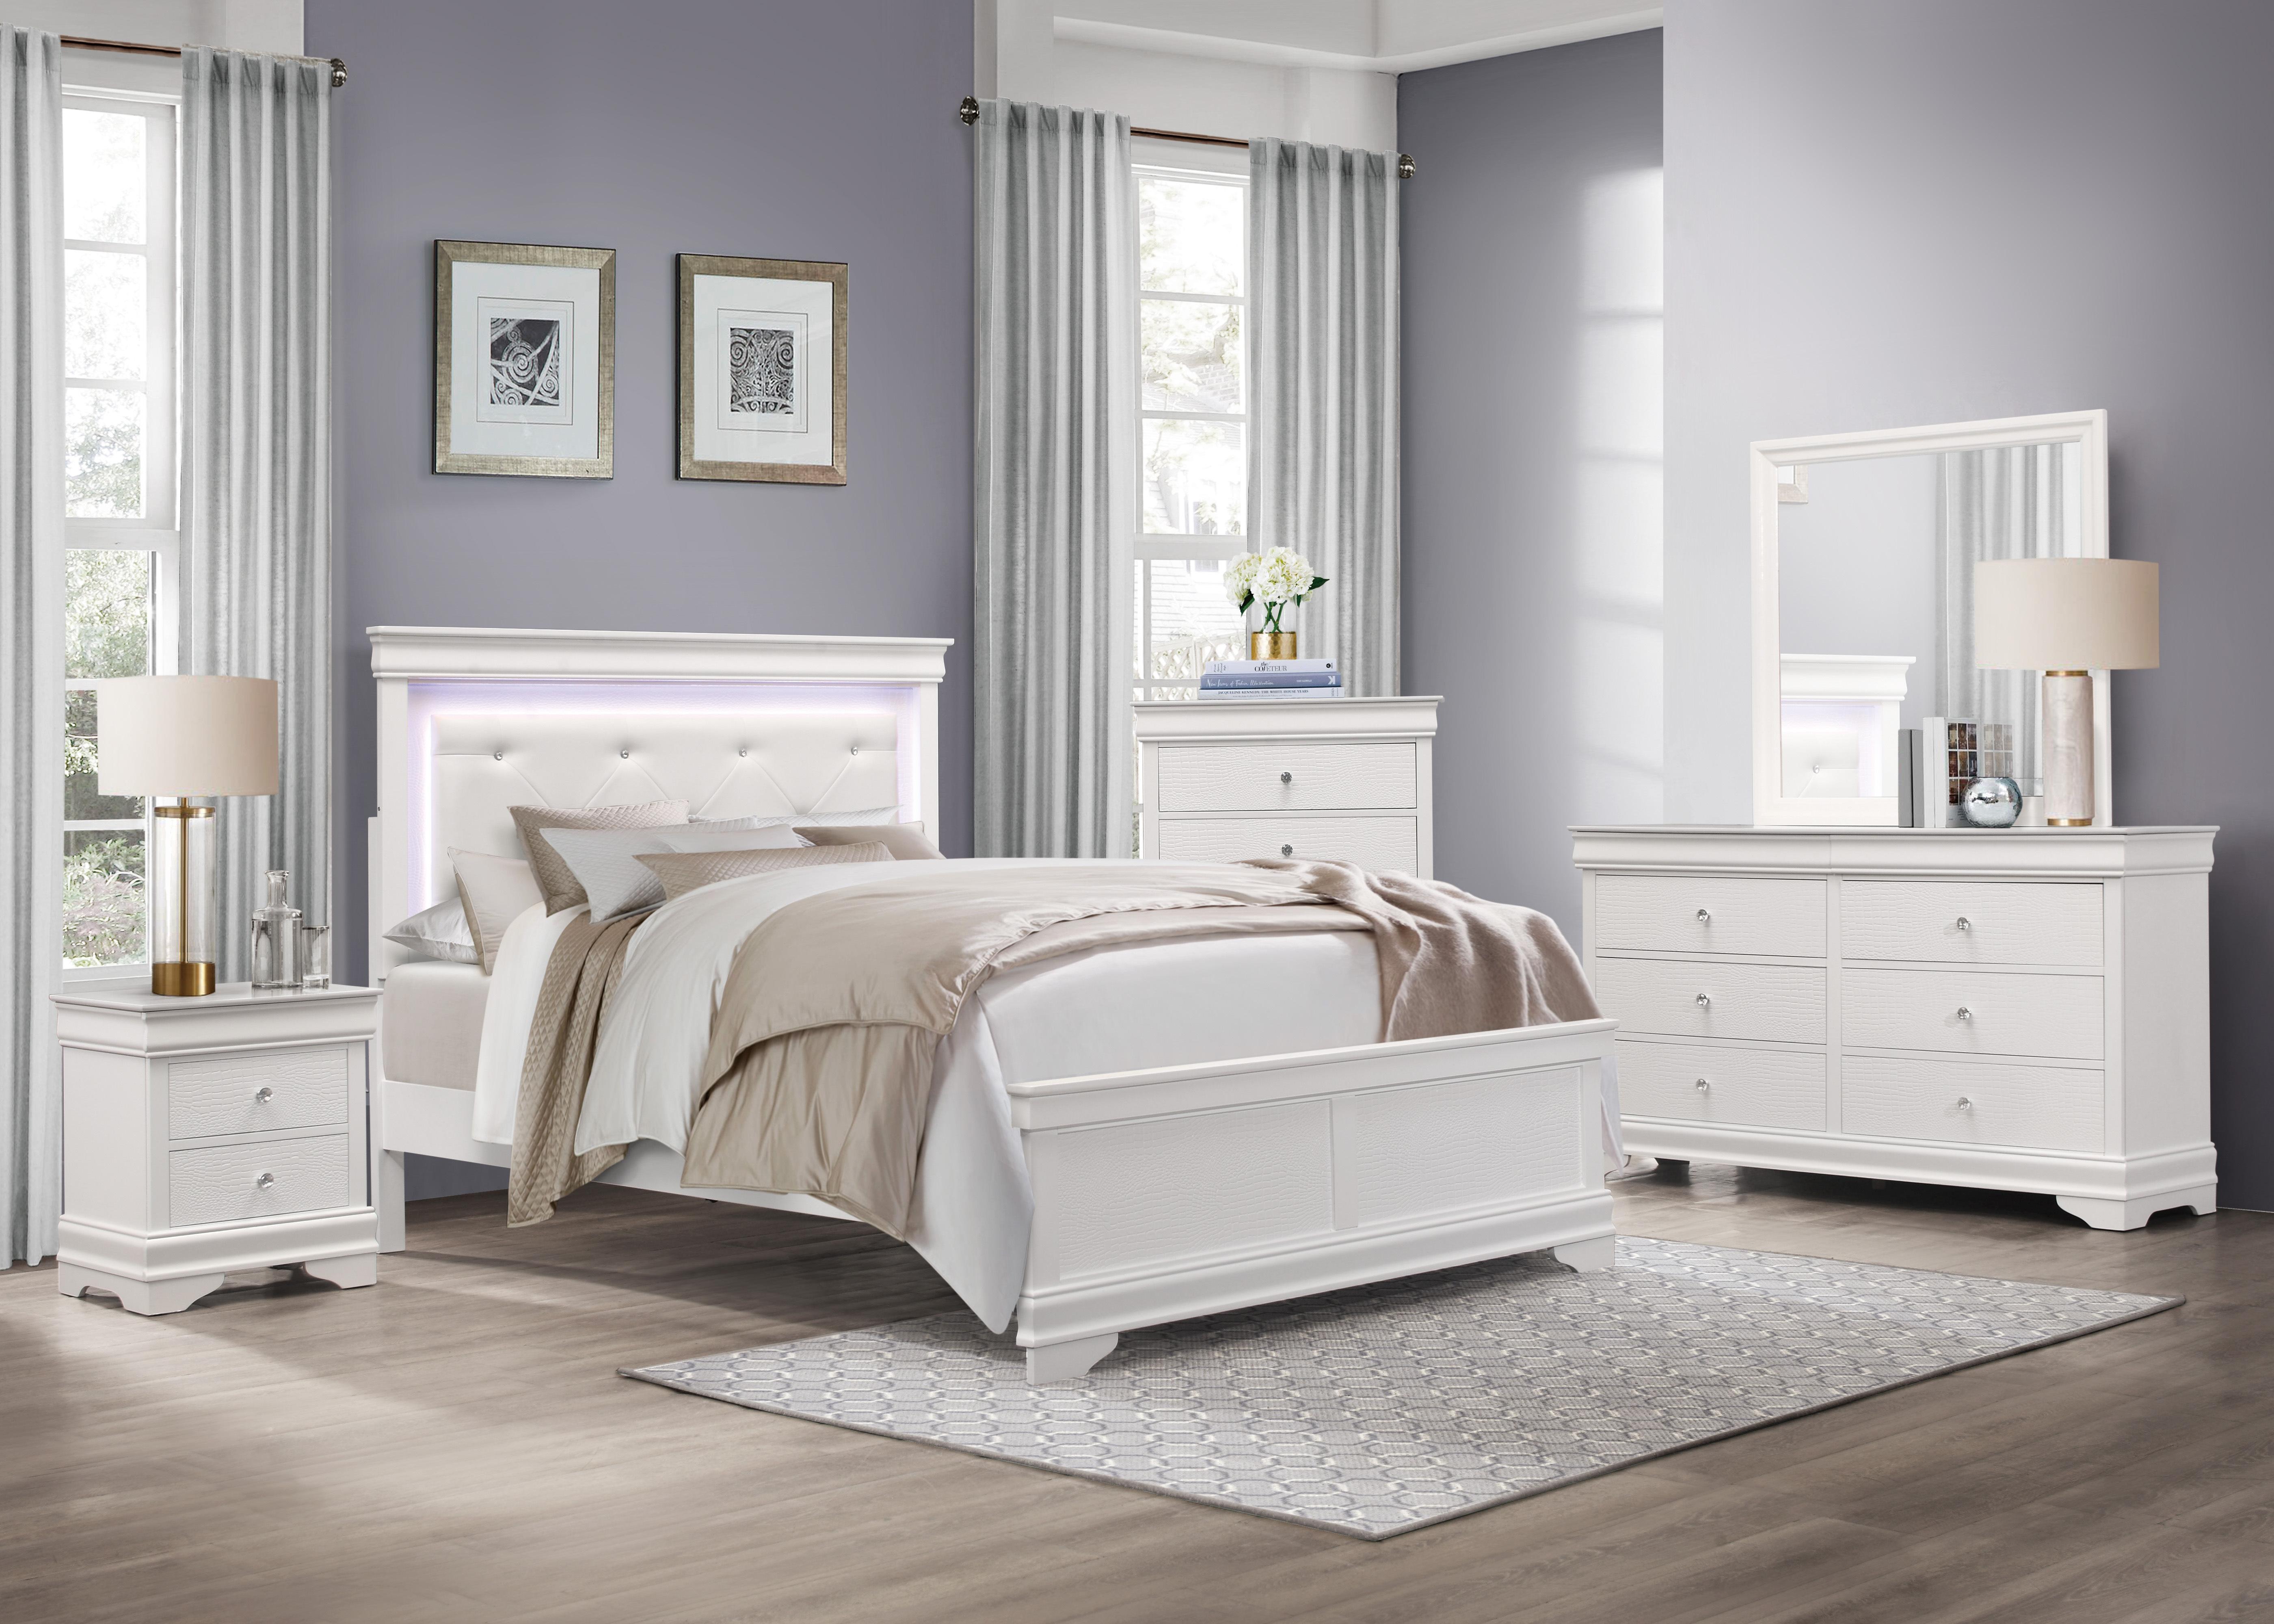 Traditional Bedroom Set 1556WK-1CK-5PC Lana 1556WK-1CK-5PC in White Faux Leather